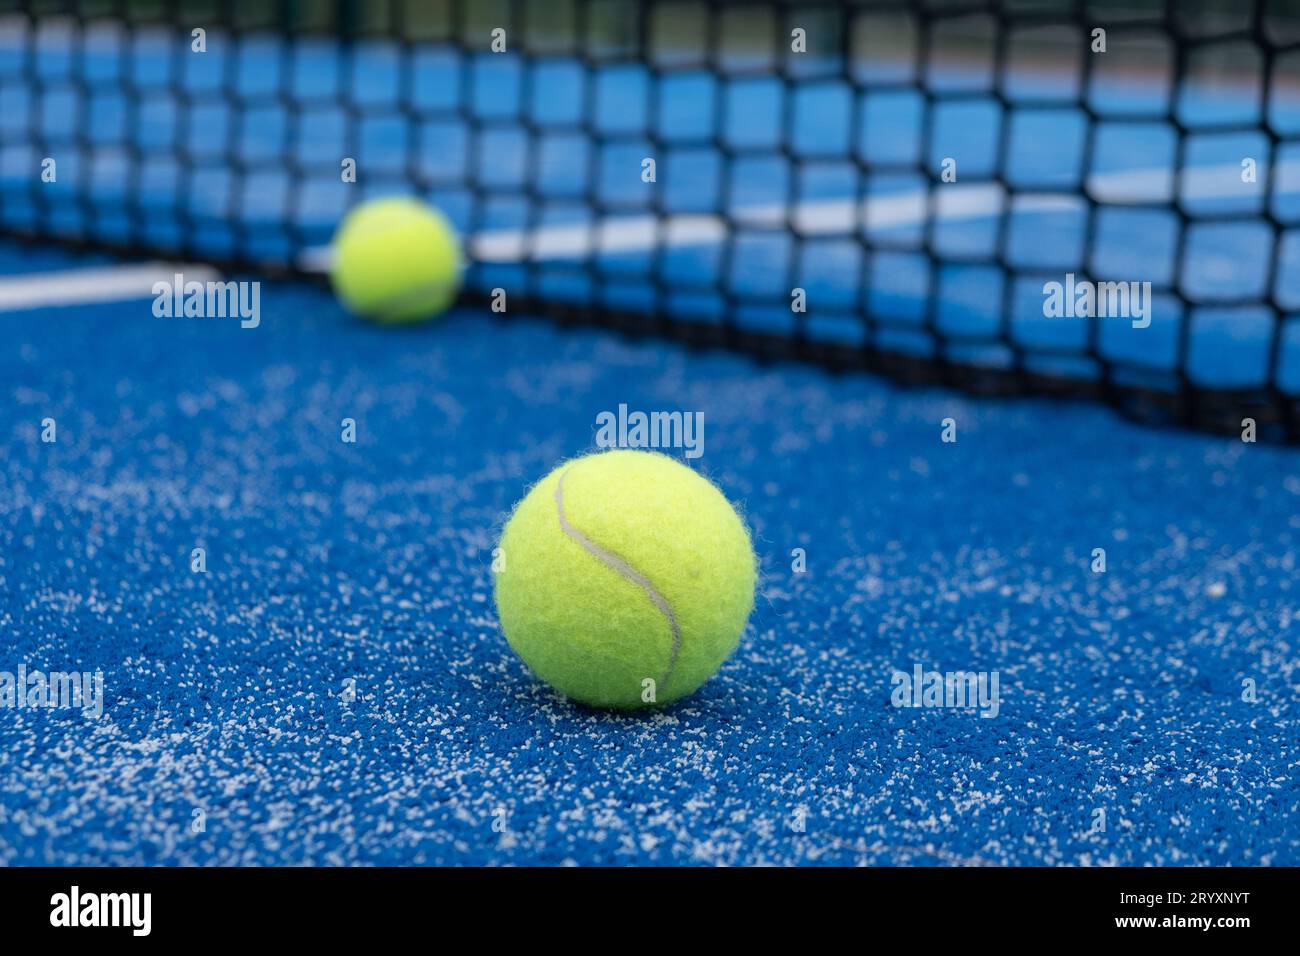 Two balls near the net of a blue padel tennis court, racket sports concept Stock Photo